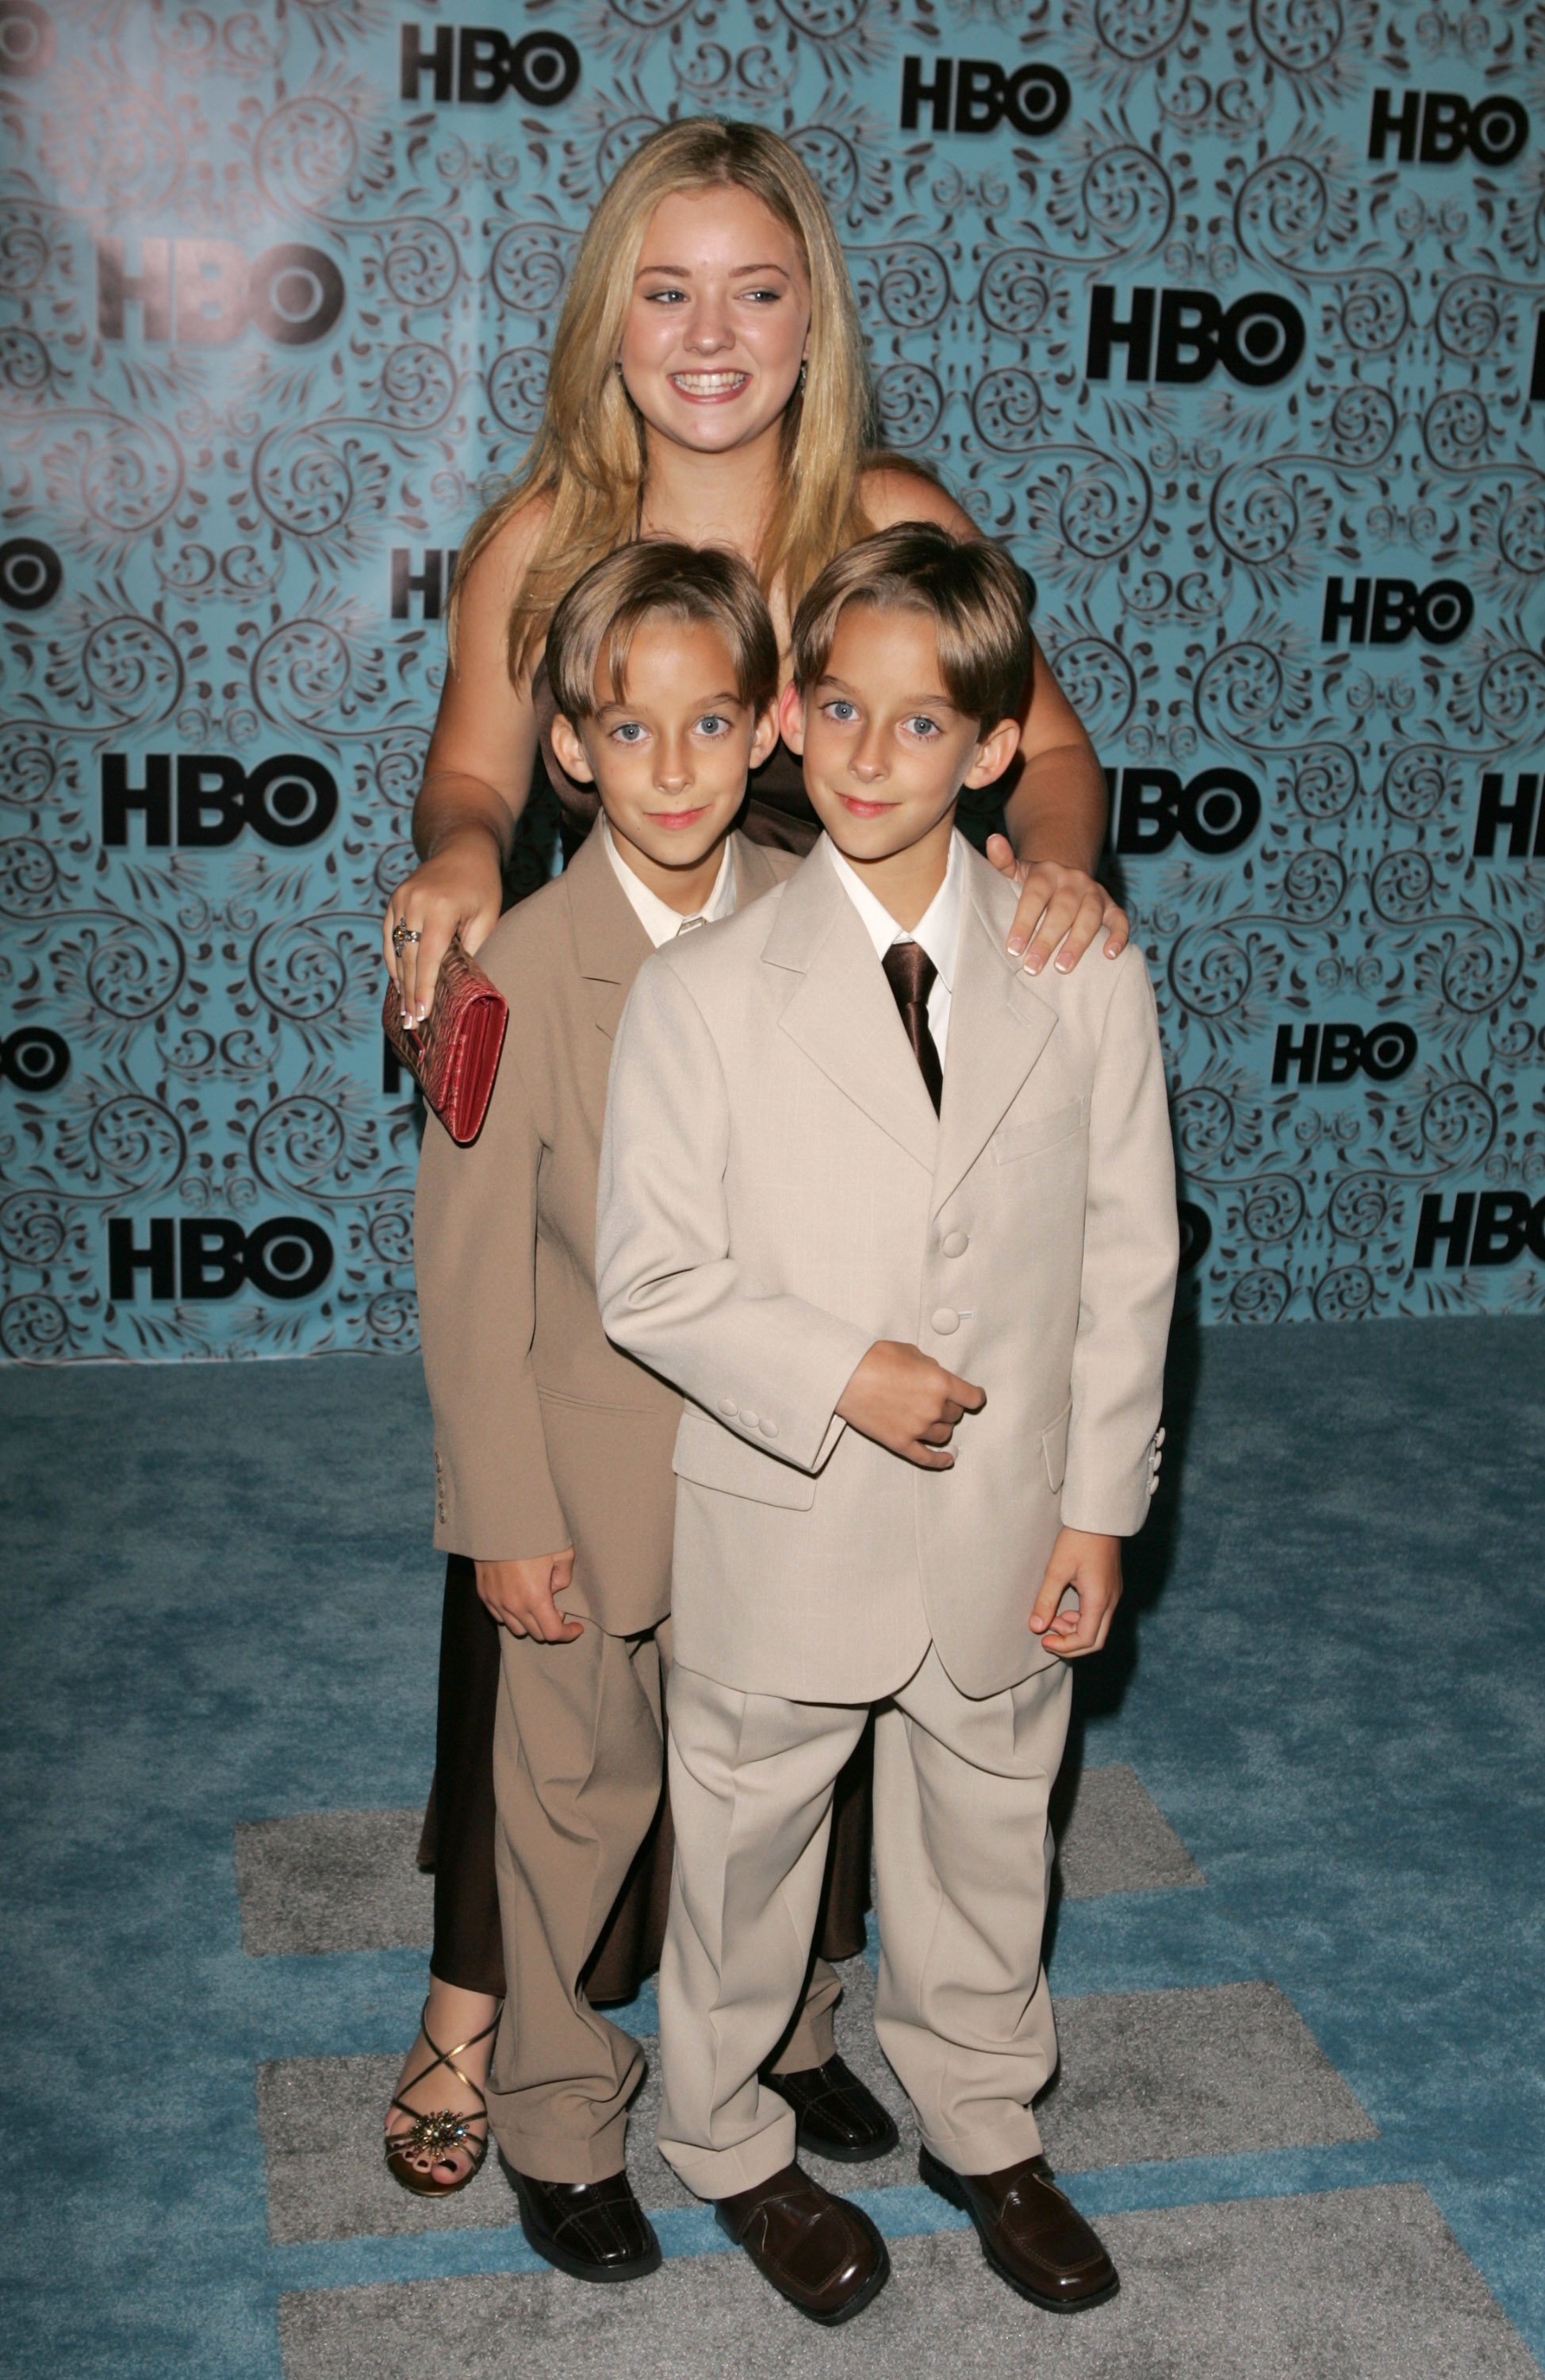 Madylin, Sawyer, and Sullivan Sweeten at the 57th Annual Emmy Awards on September 18, 2005 | Source: Getty Images